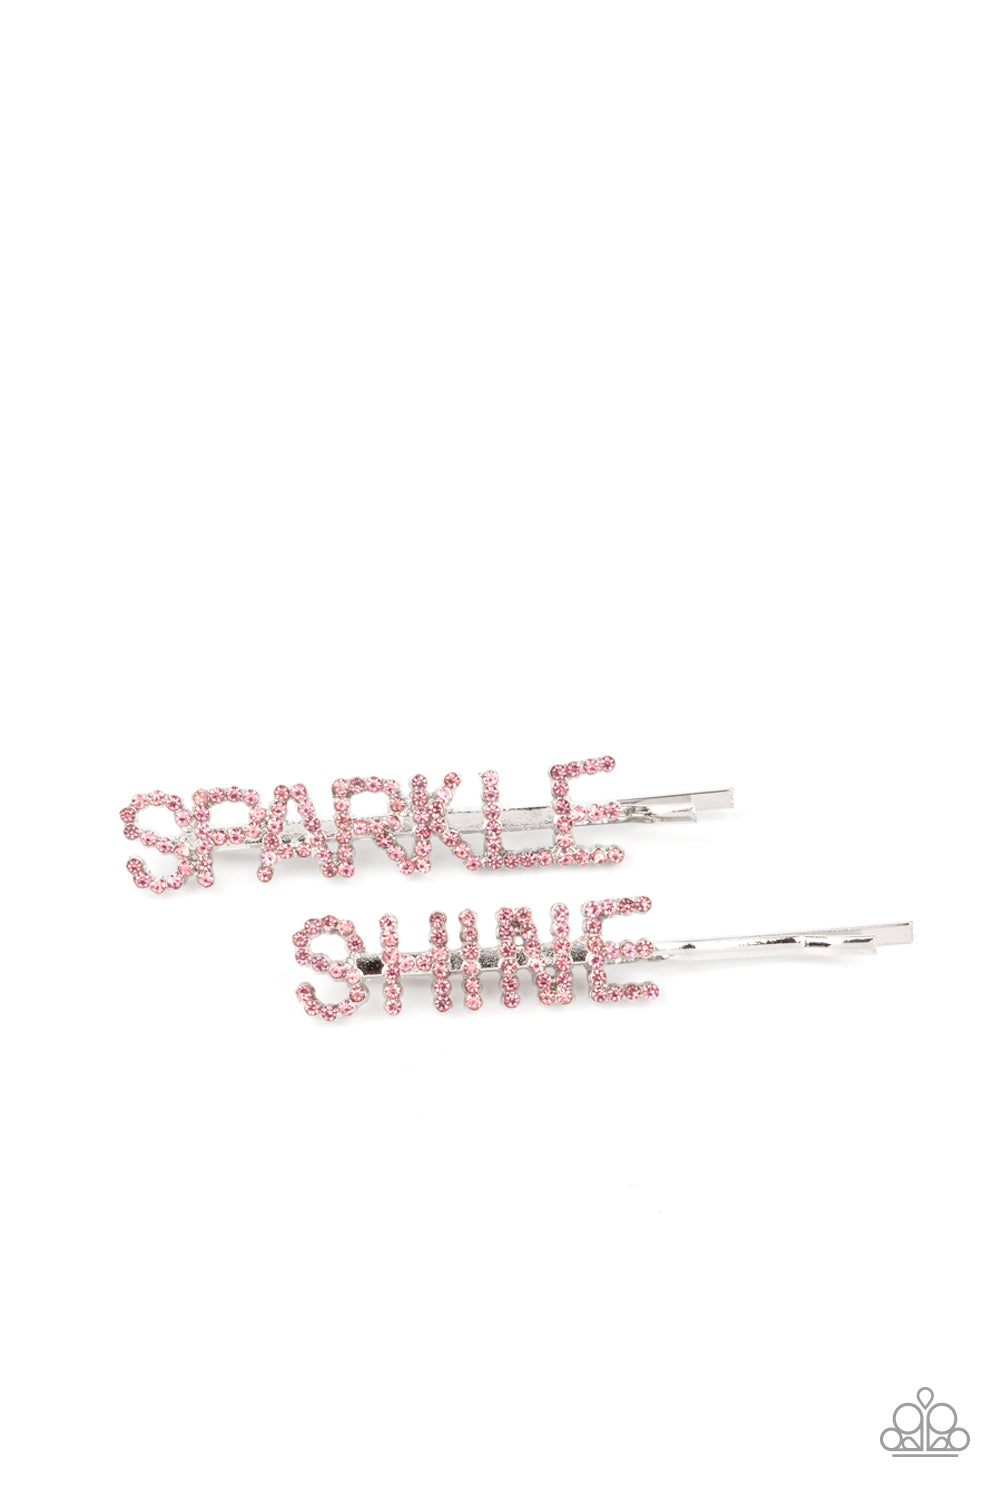 Center of the SPARKLE-verse Pink Hair Clip